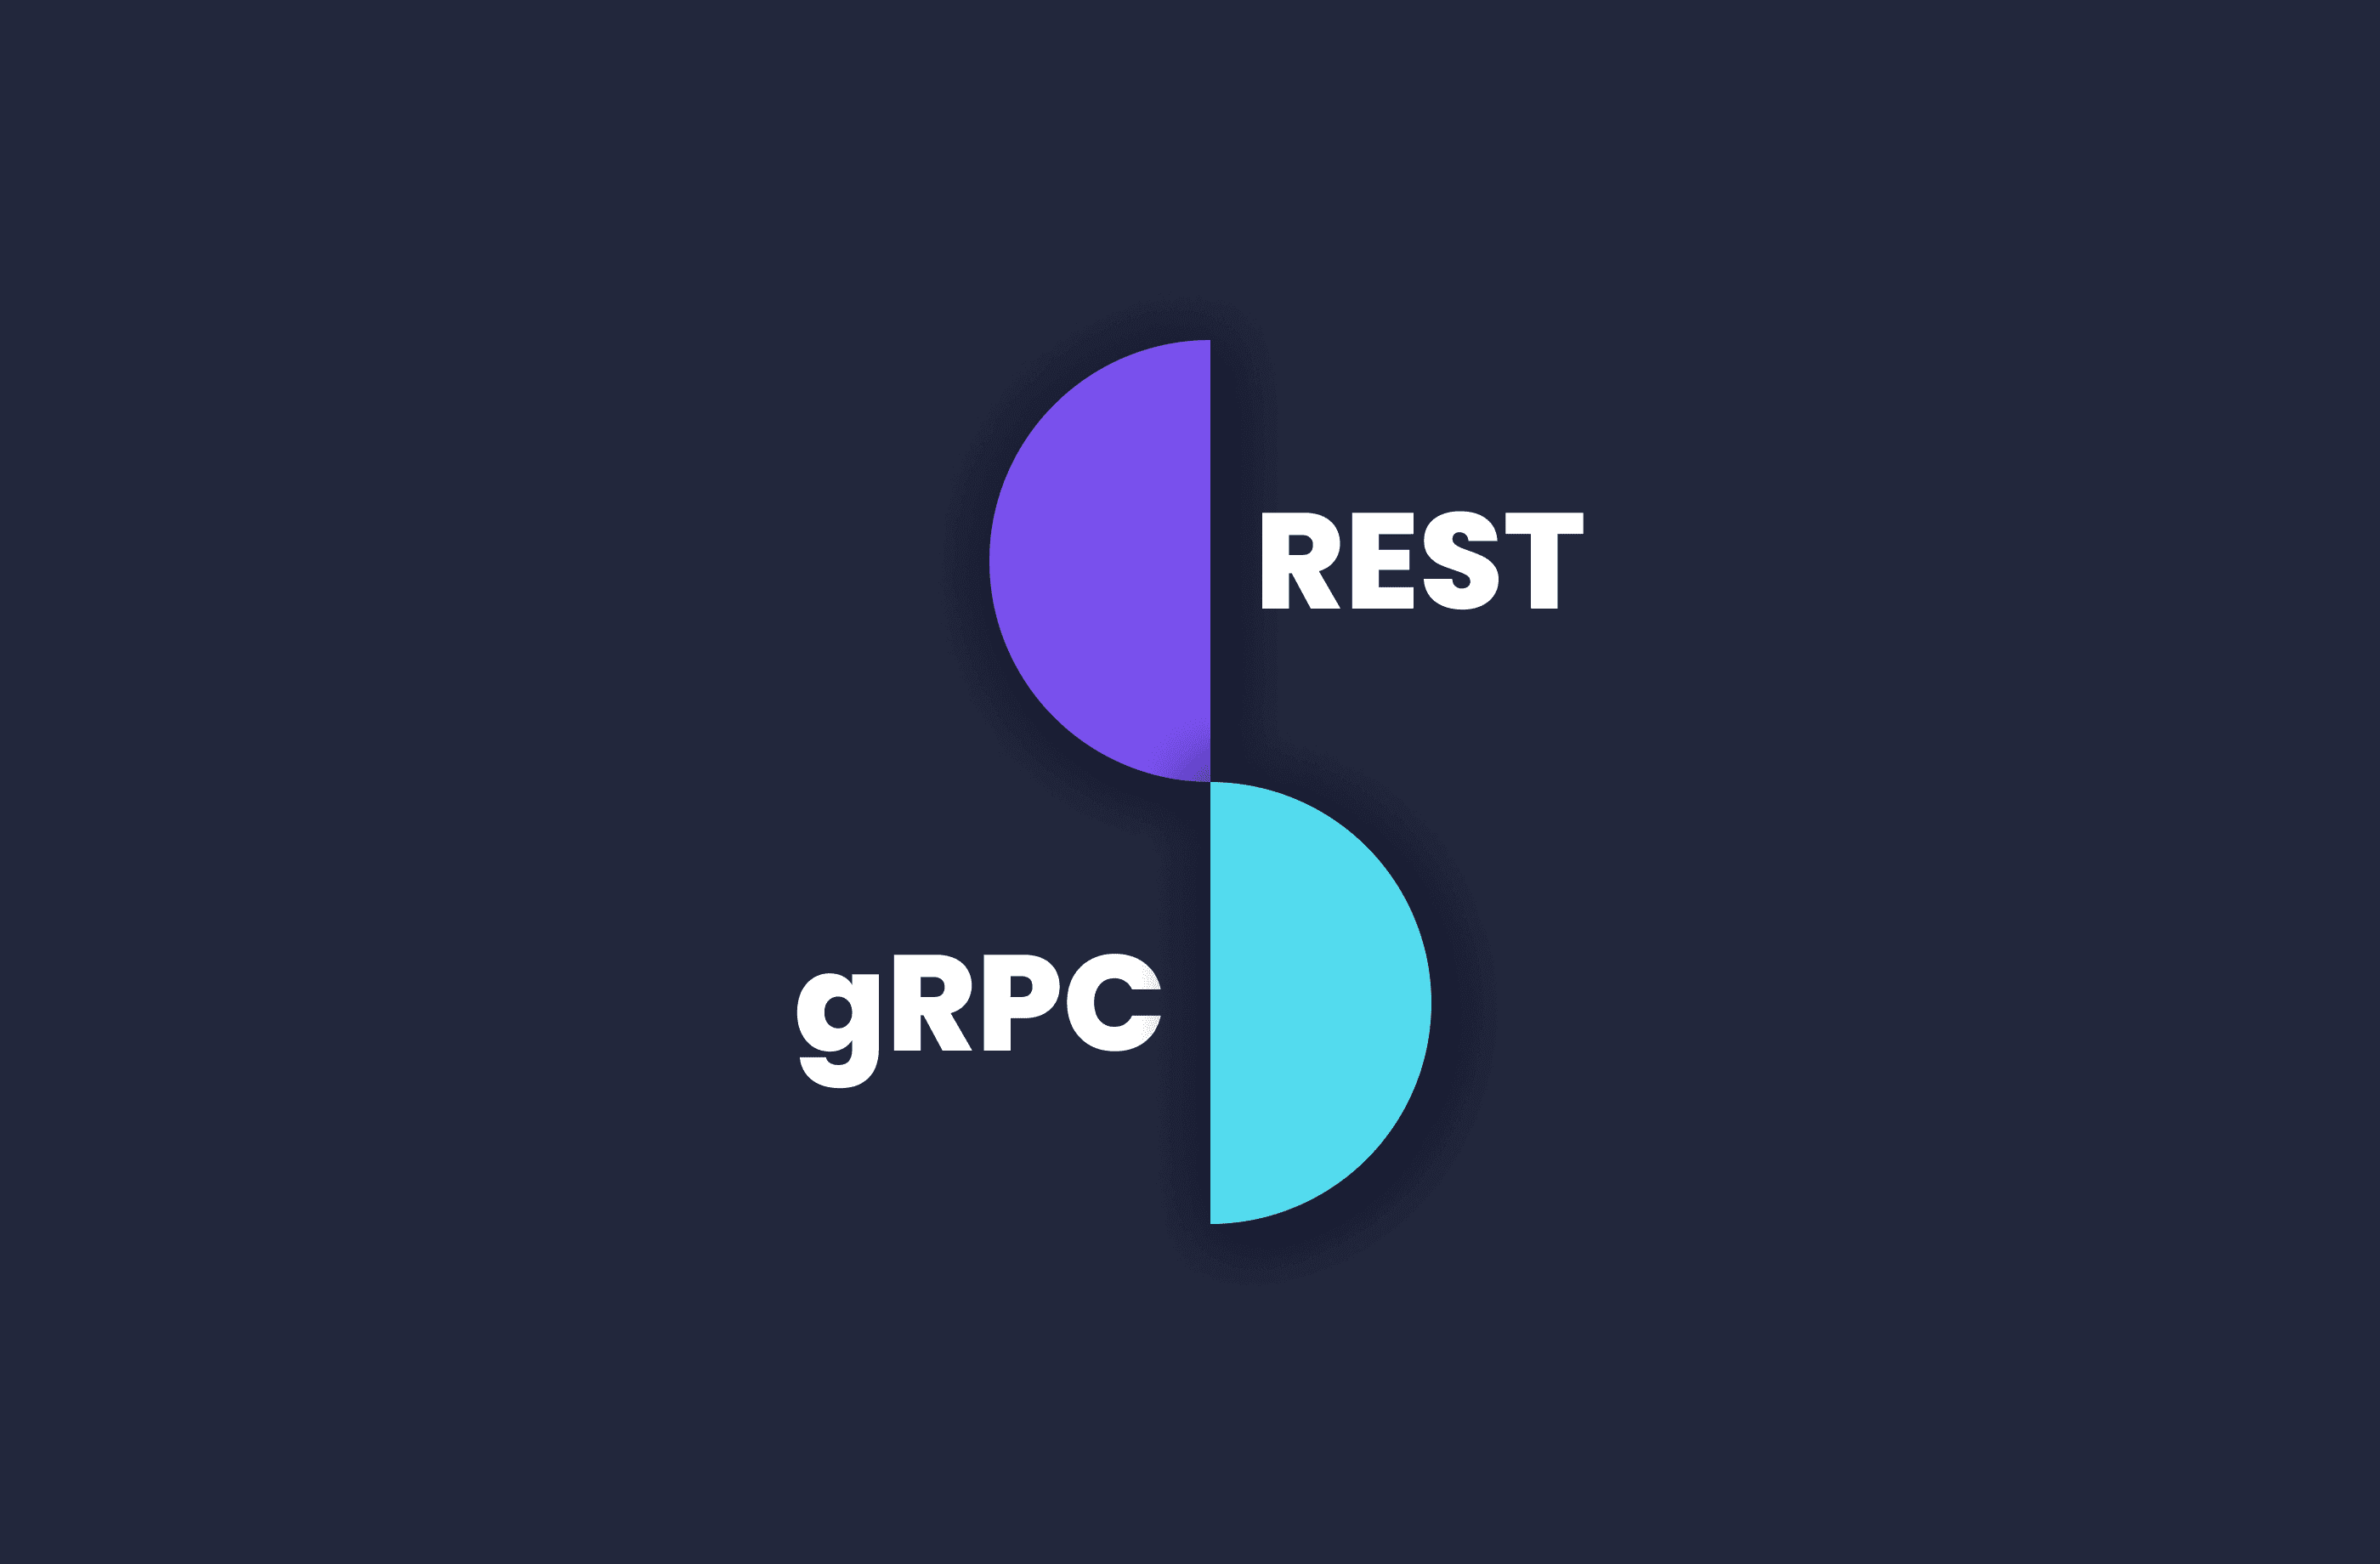 What’s the Difference between gRPC vs REST?